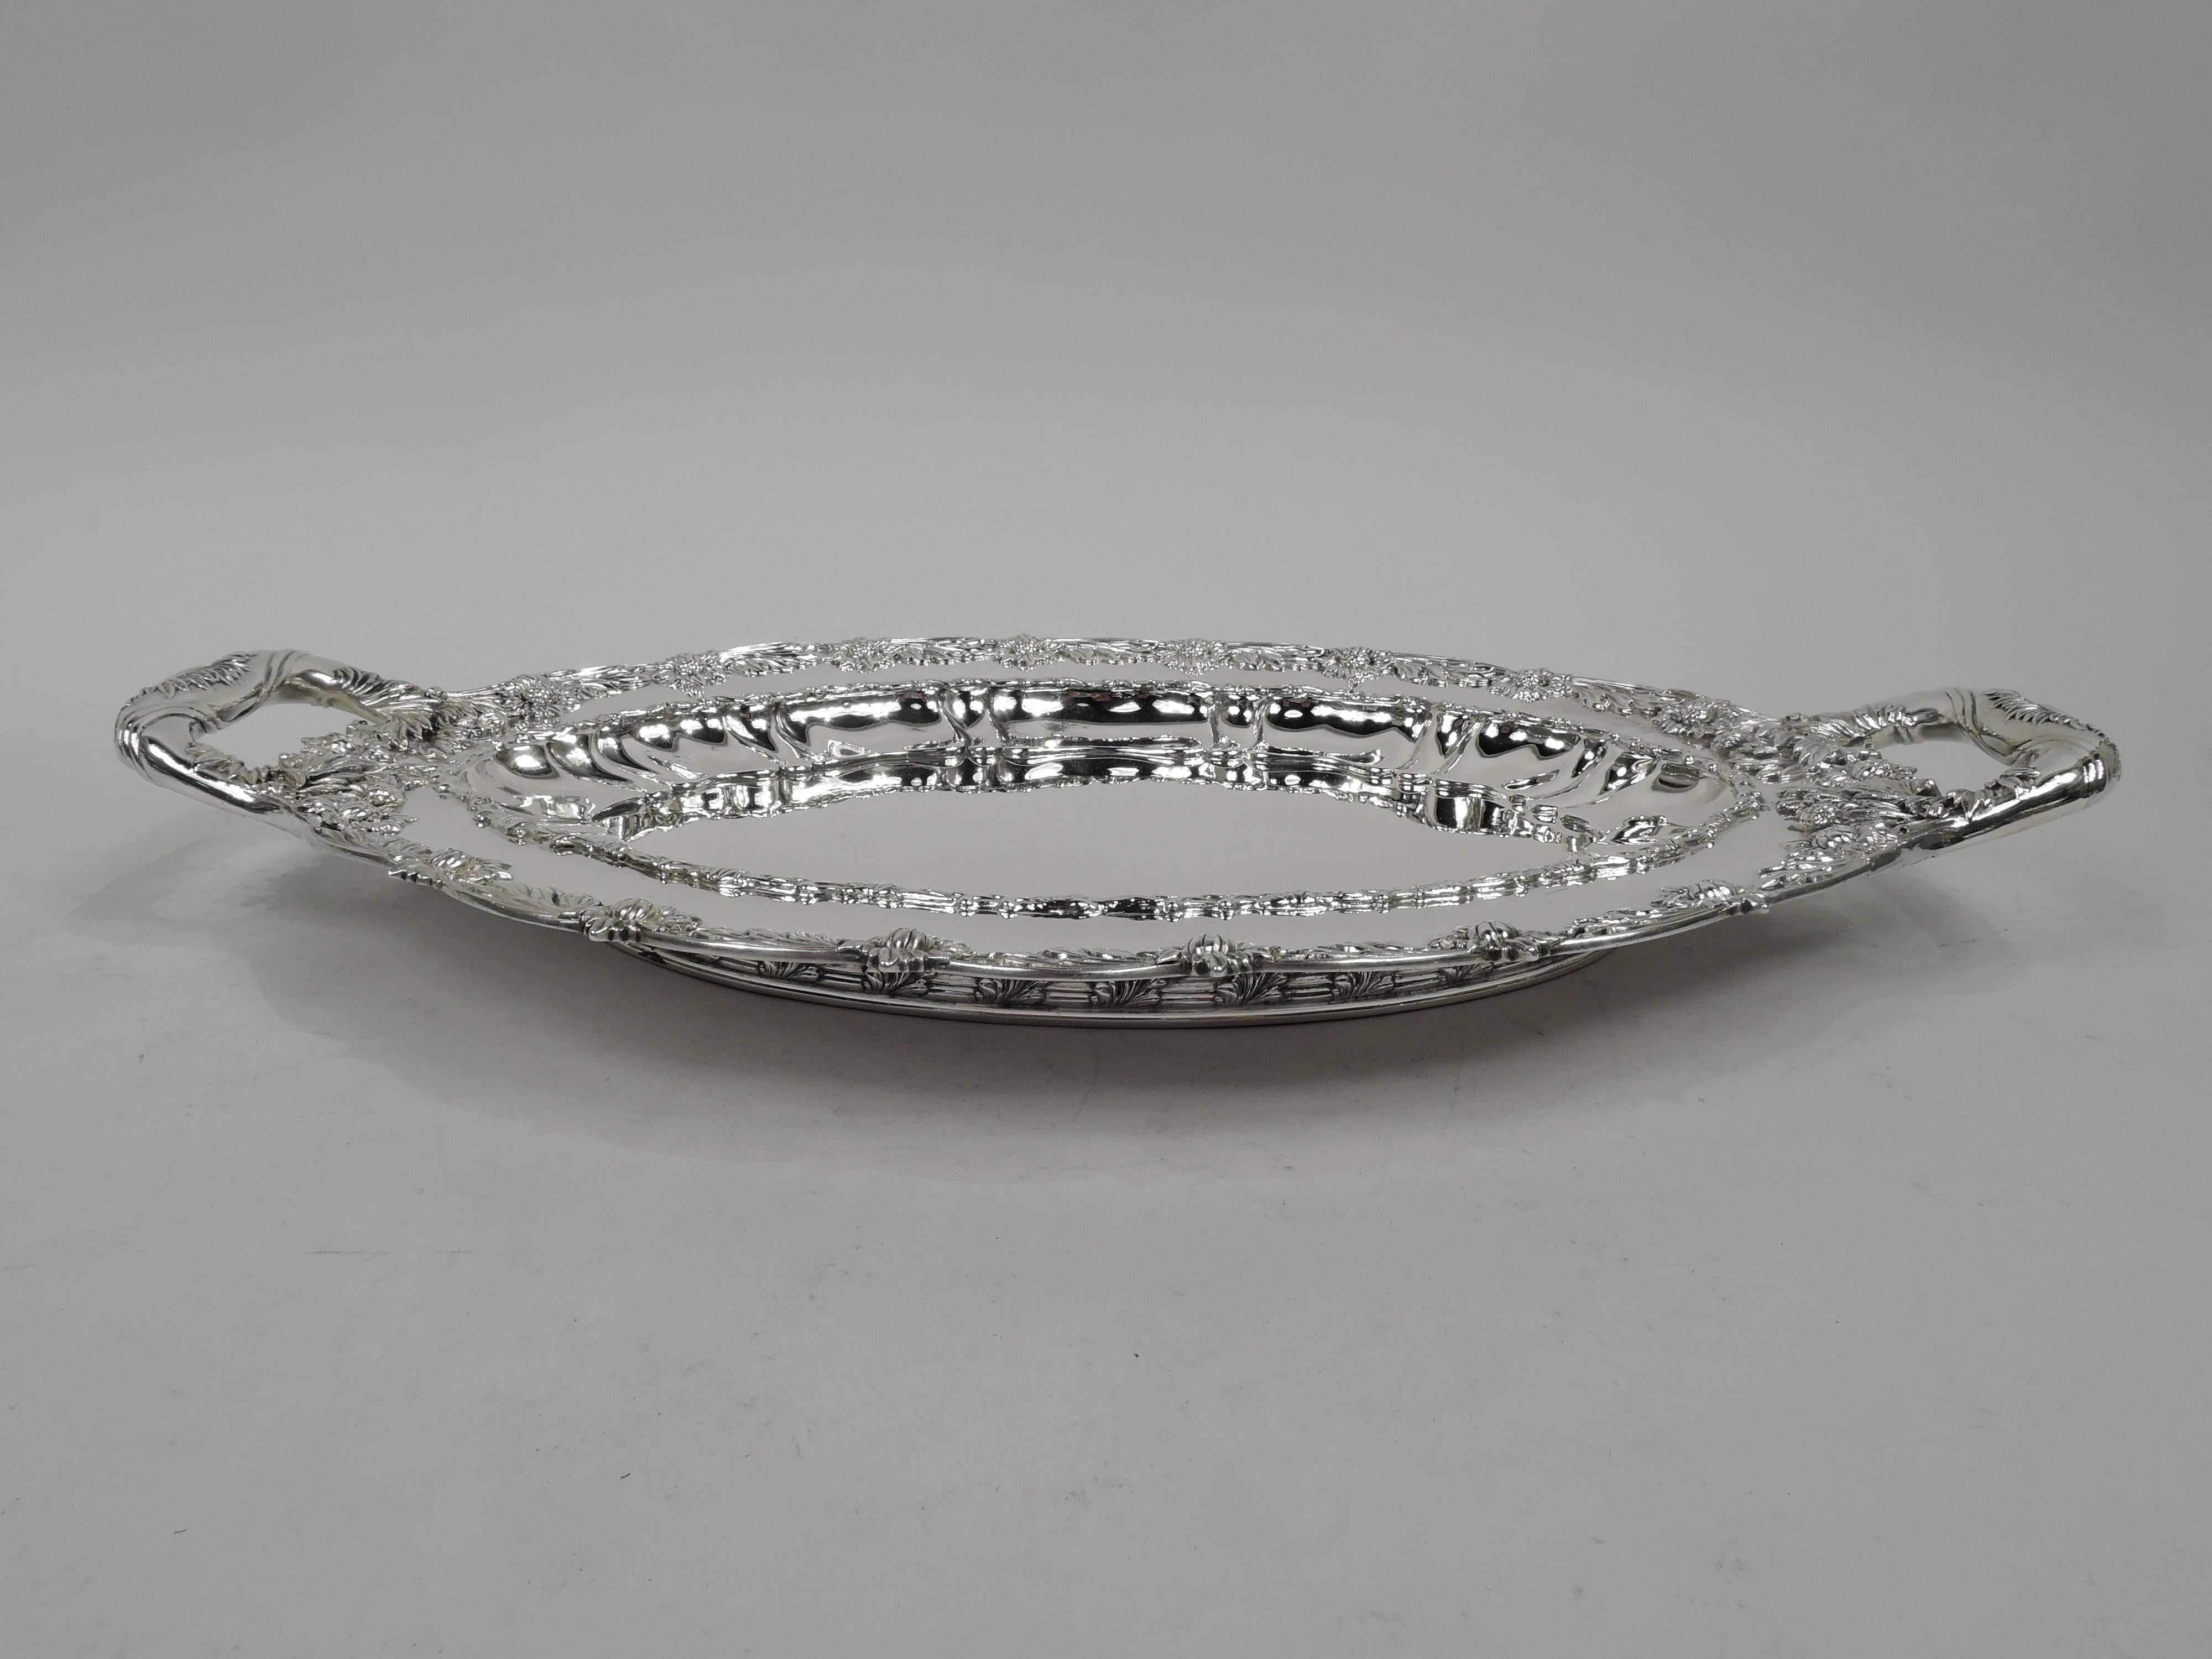 Chrysanthemum sterling silver serving dish. Made by Tiffany & Co. in New York. Shaped oval well, curved sides with lobing and applied leaf border. A profusion of blossoms bunched at ends and wrapped around bracket handles. Scalloped rim with